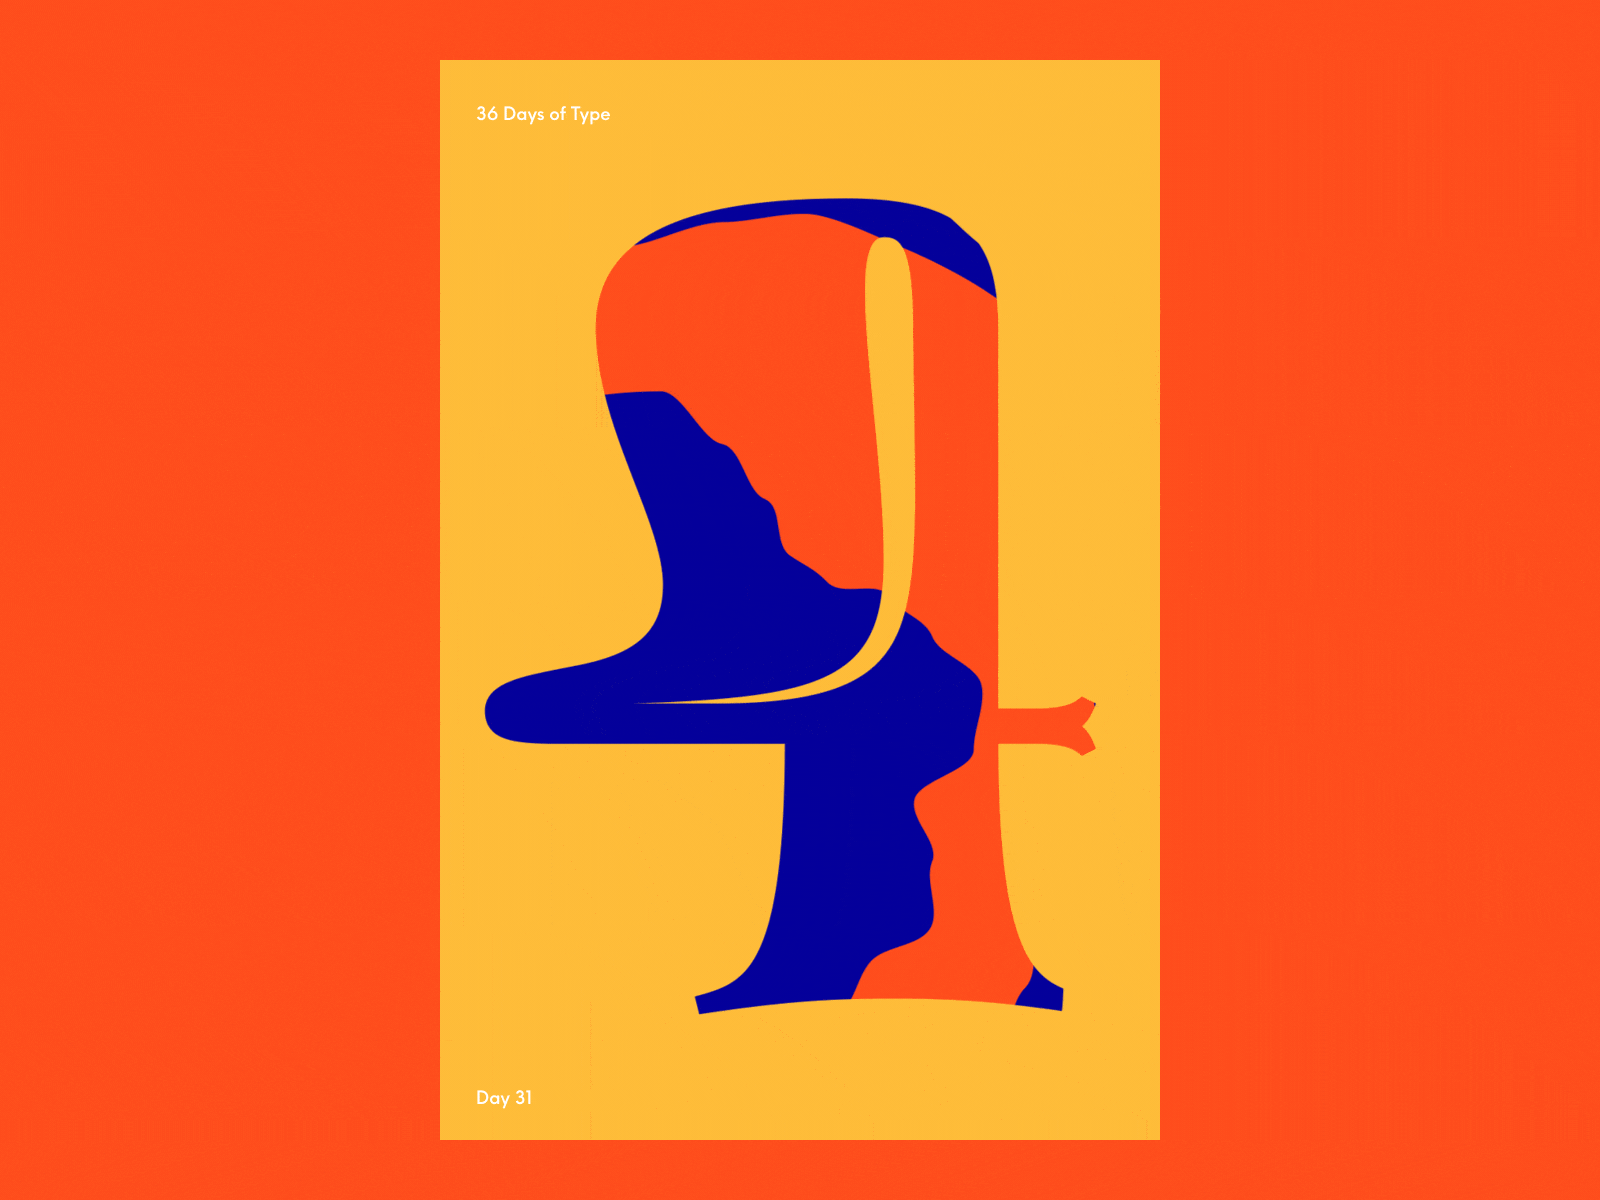 36 Days of Type / 4 36 days of type 36daysoftype 36daysoftype08 36dot ae after effects animated animated type animation animography colors design kinetic kinetic type motion motion design motion graphic motion graphics type typography